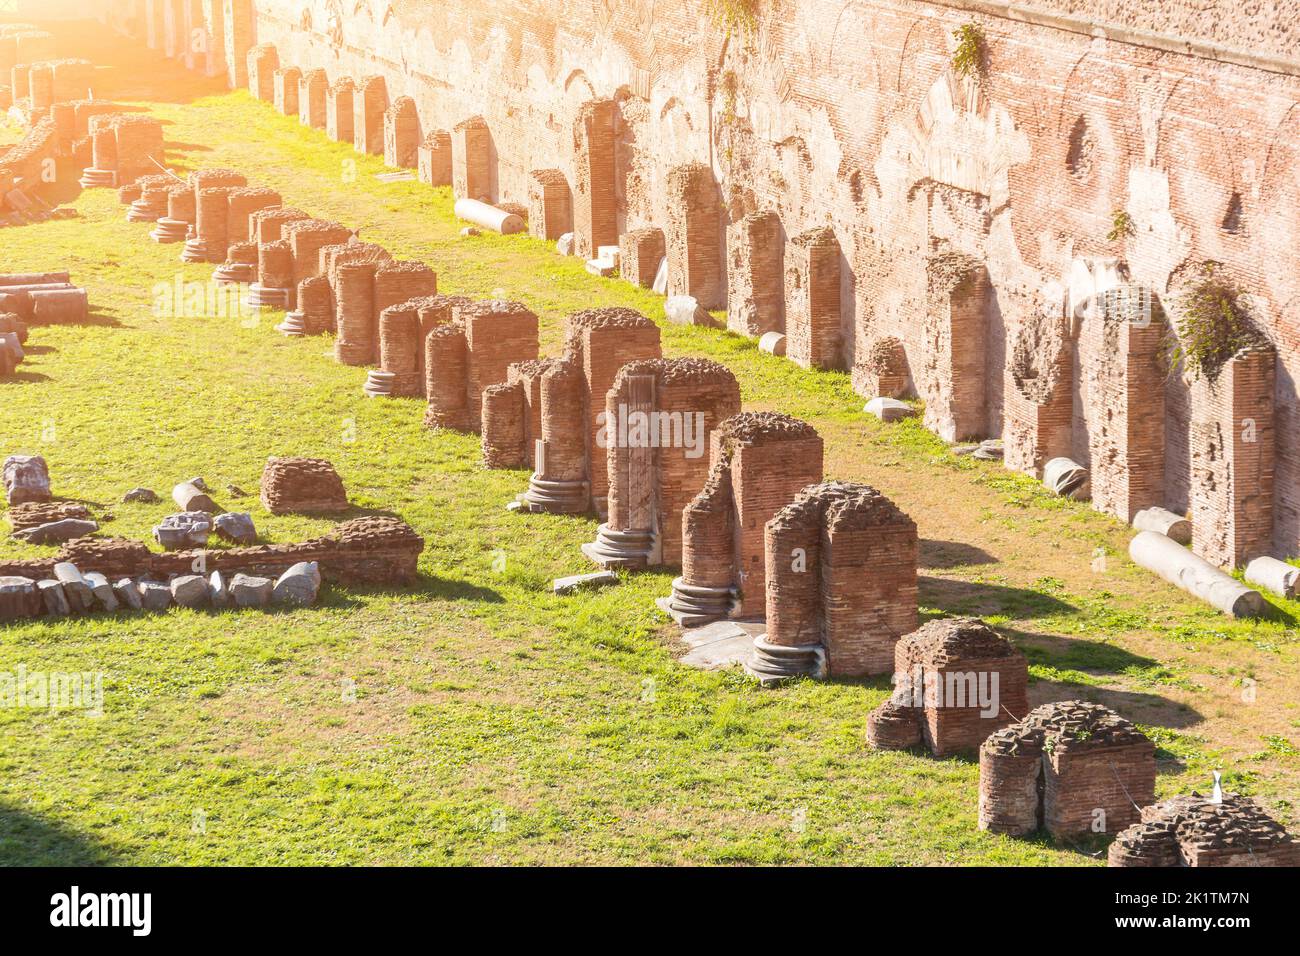 Ruined columns ancient Hippodrome of Domitian in Rome, Italy. Stock Photo